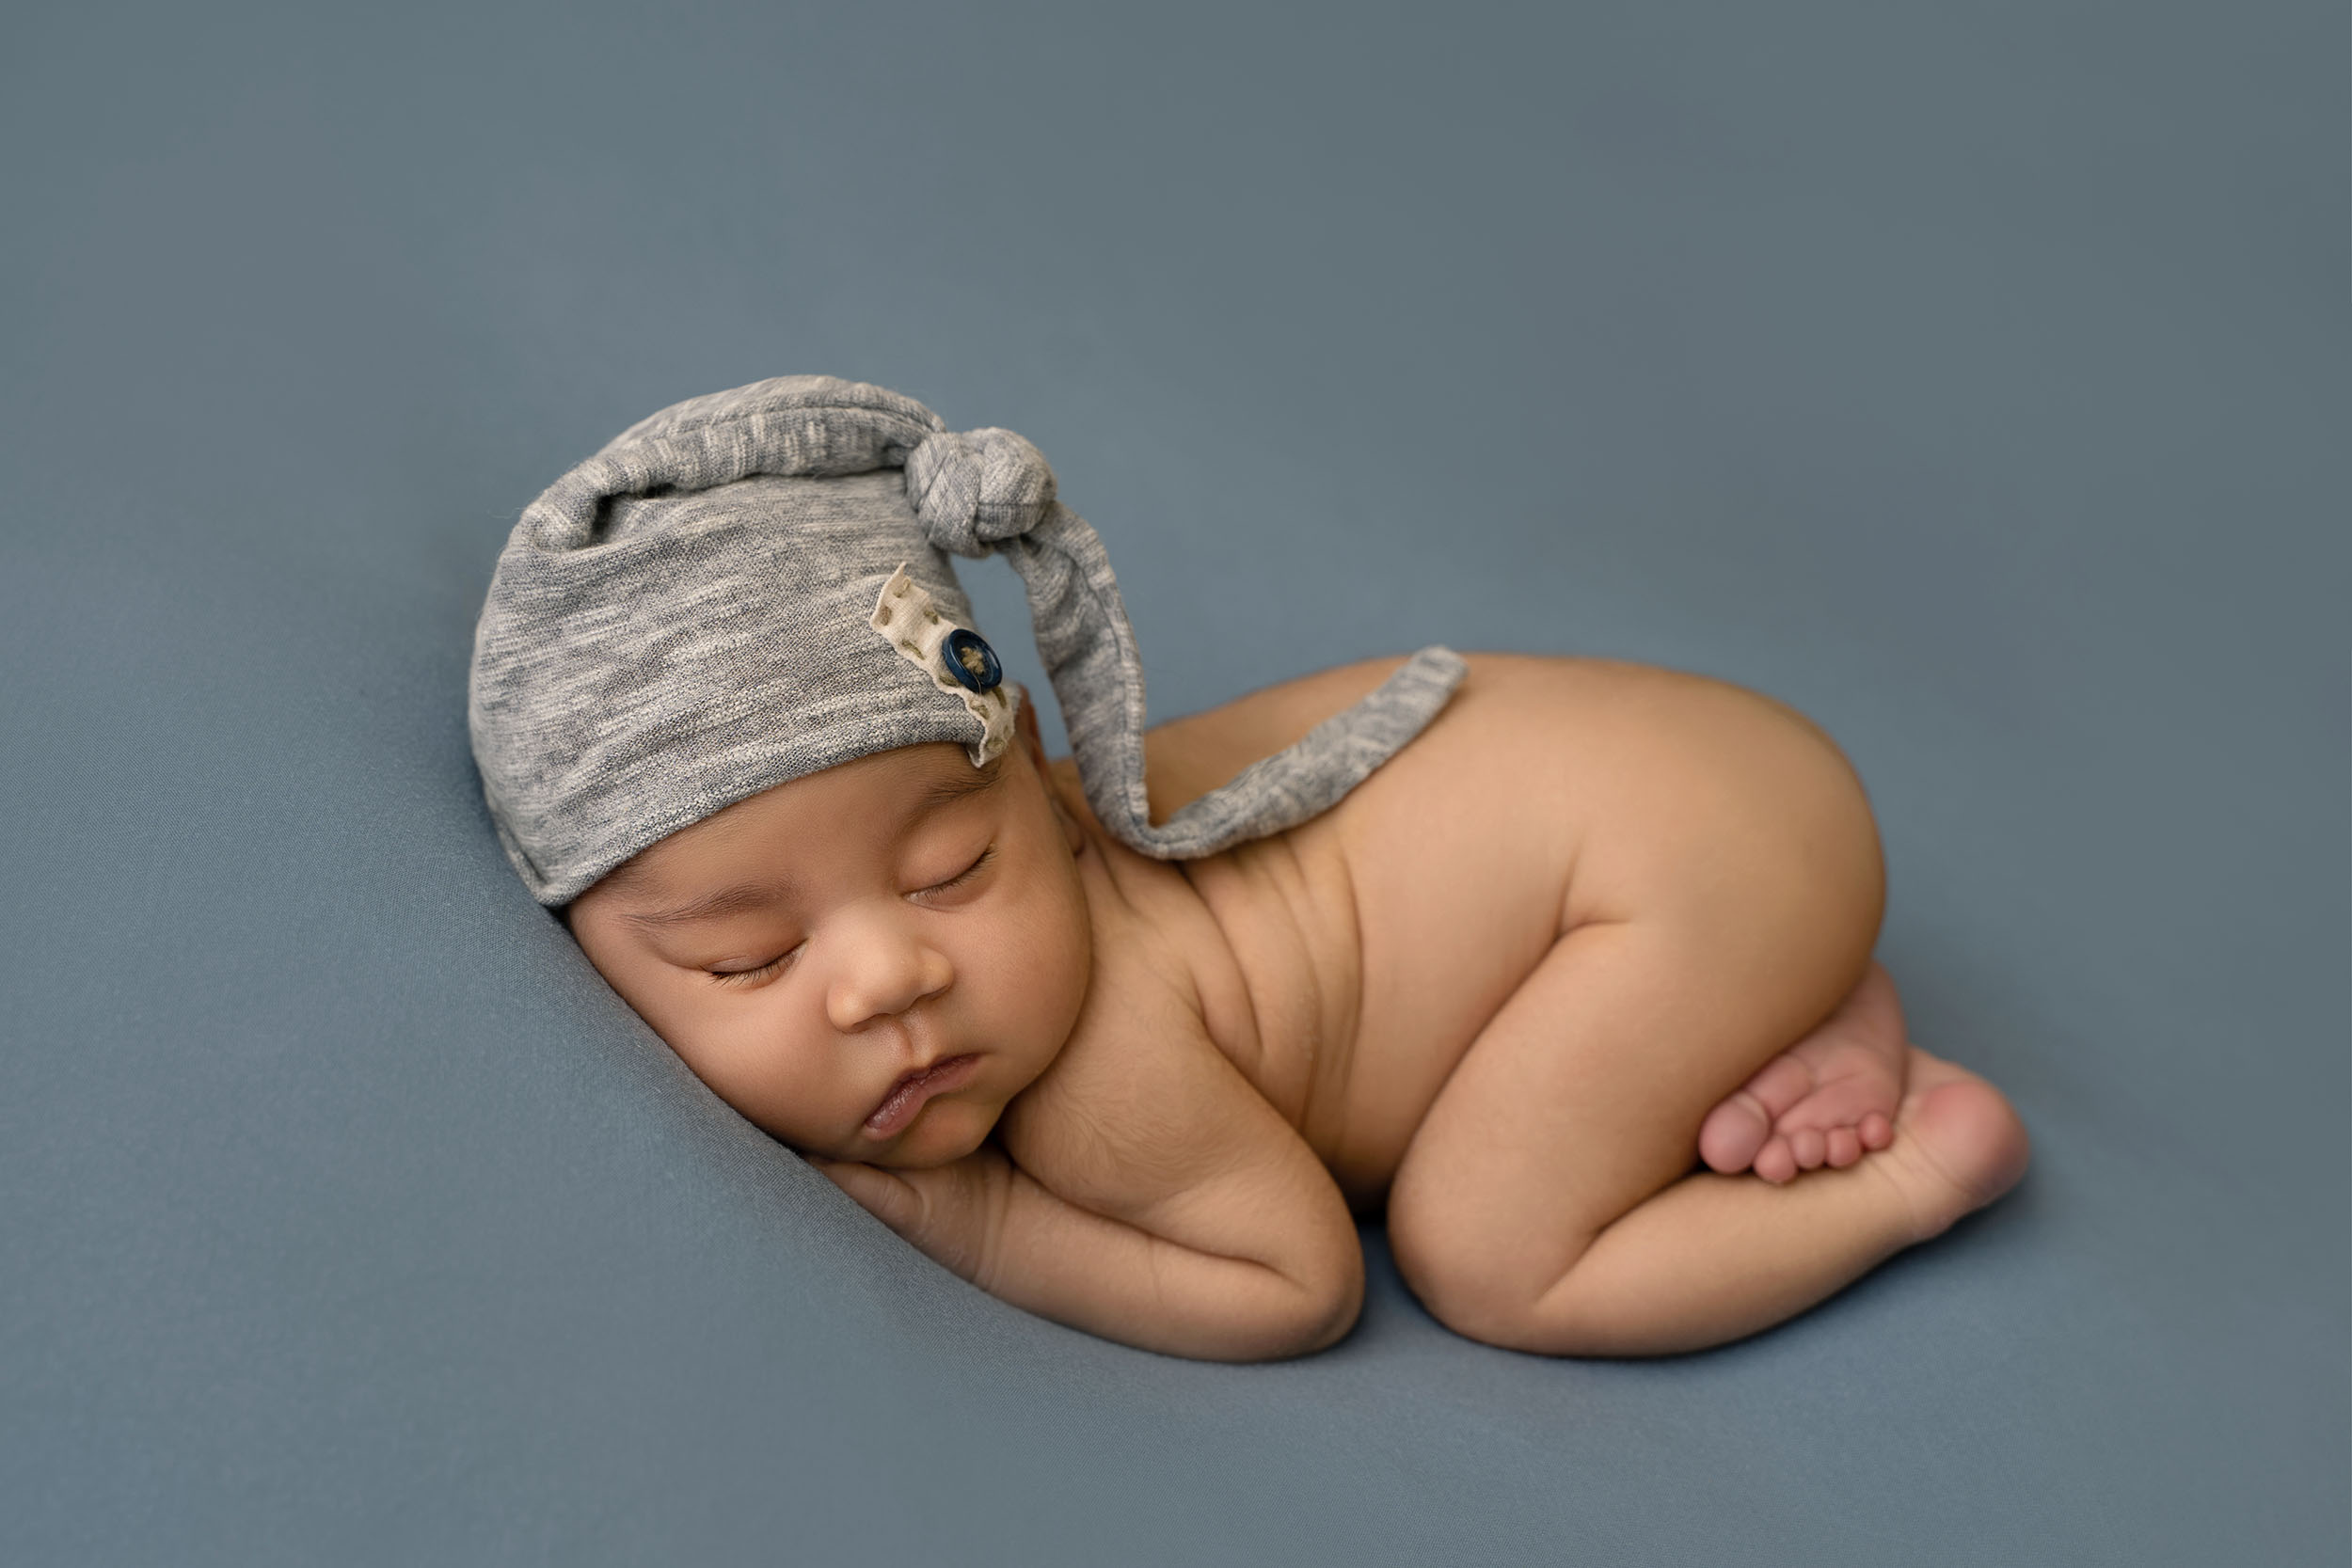 photograph of newborn baby boy posed on blue fabric with grey hat